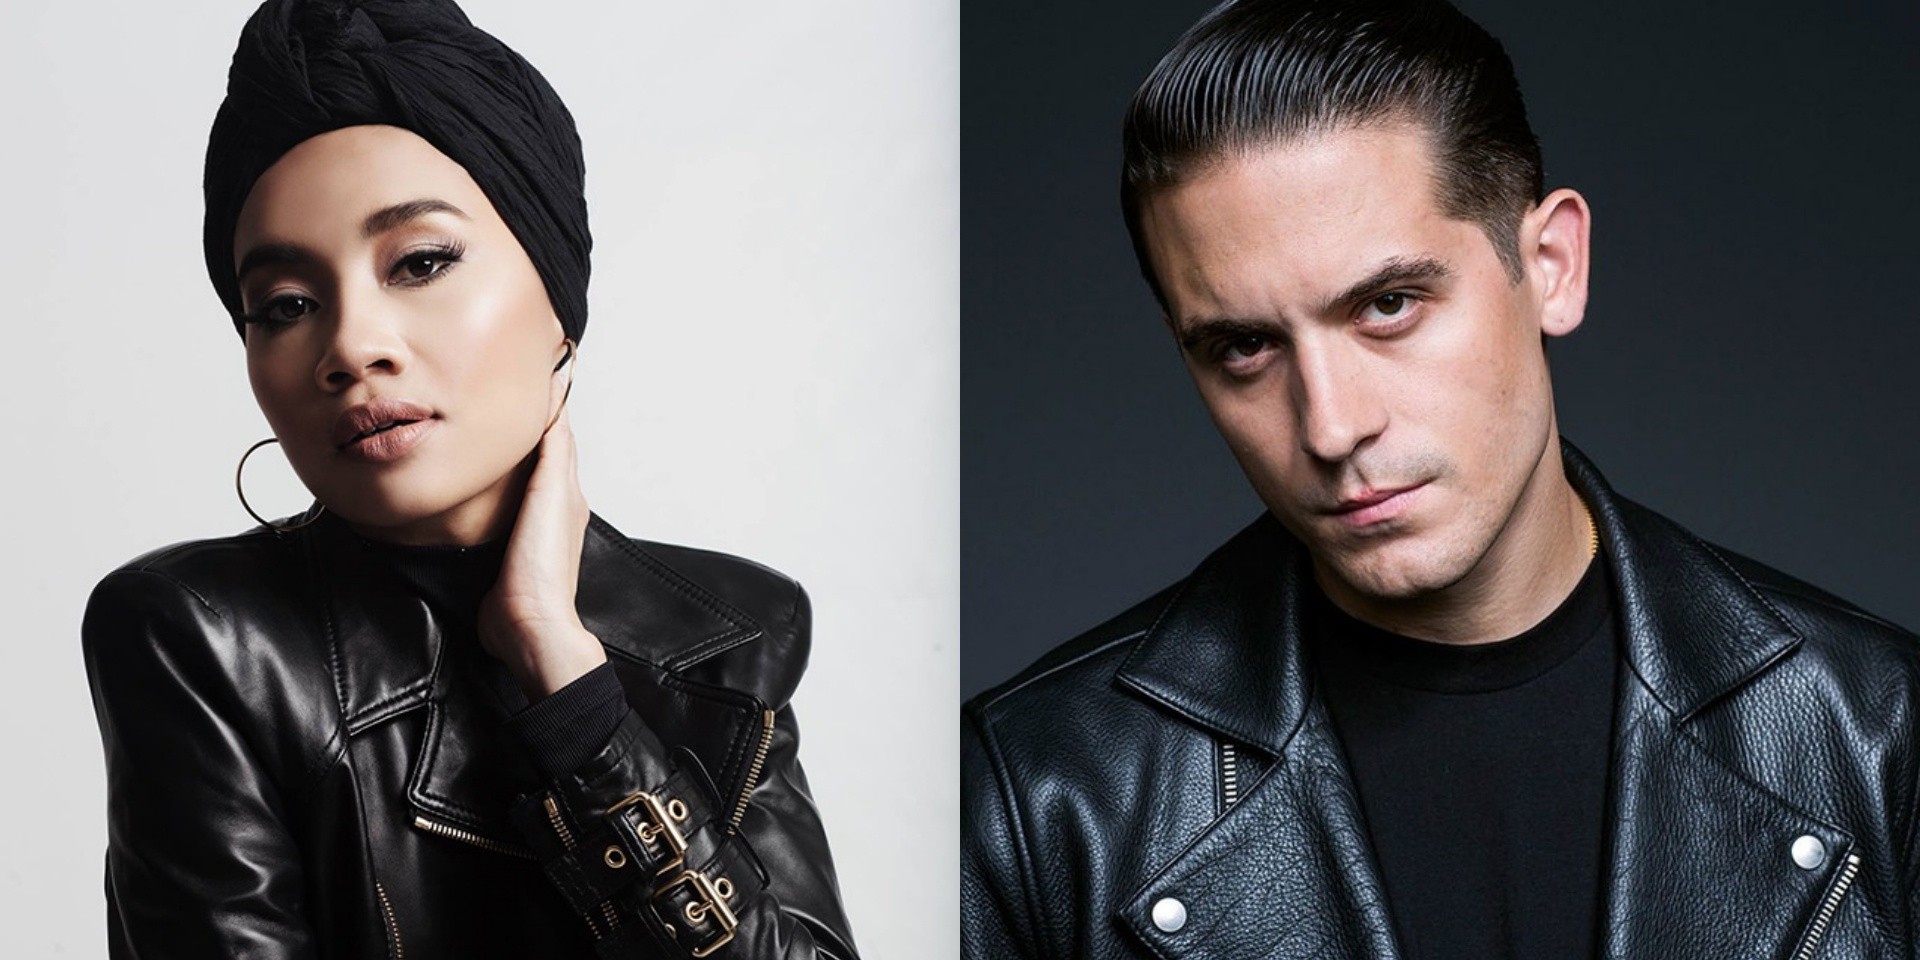 Yuna makes a daring escape in new music video for 'Blank Marquee' with G-Eazy – watch